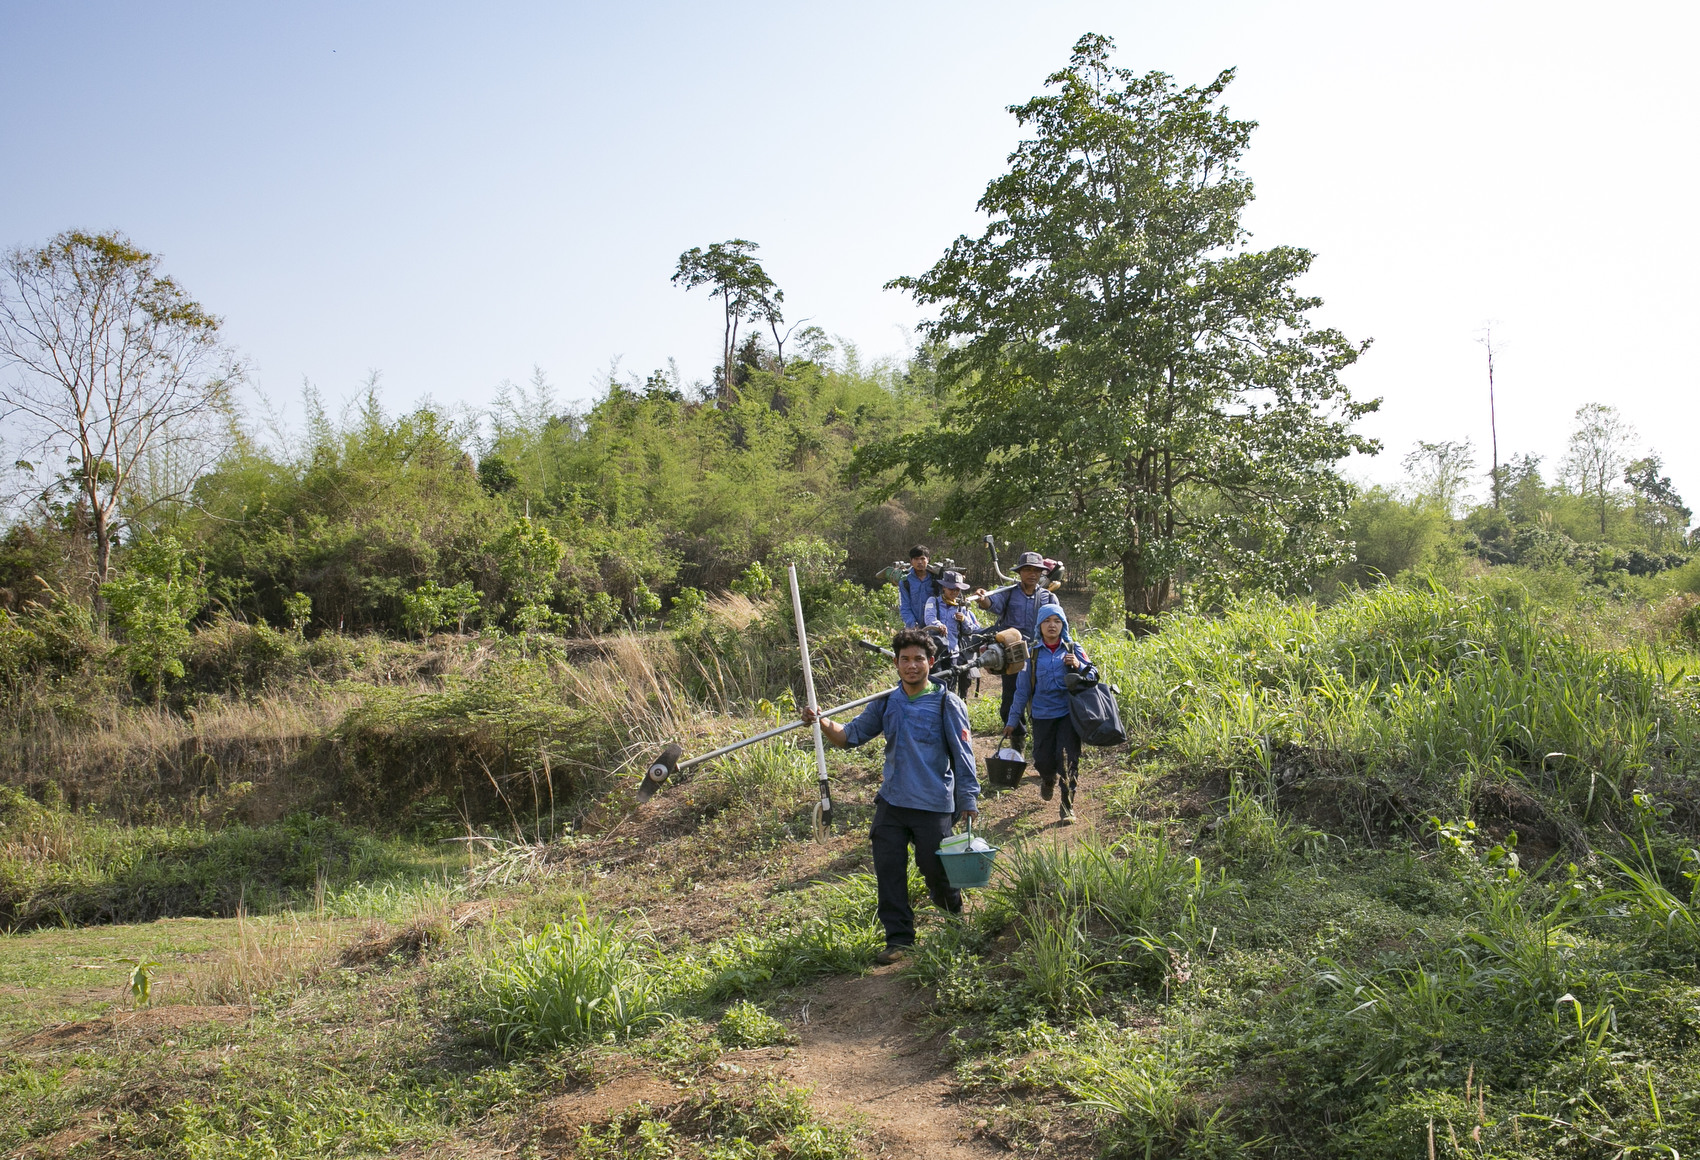 The team exits the field March 30, 2019 in Kamrieng , Cambodia.